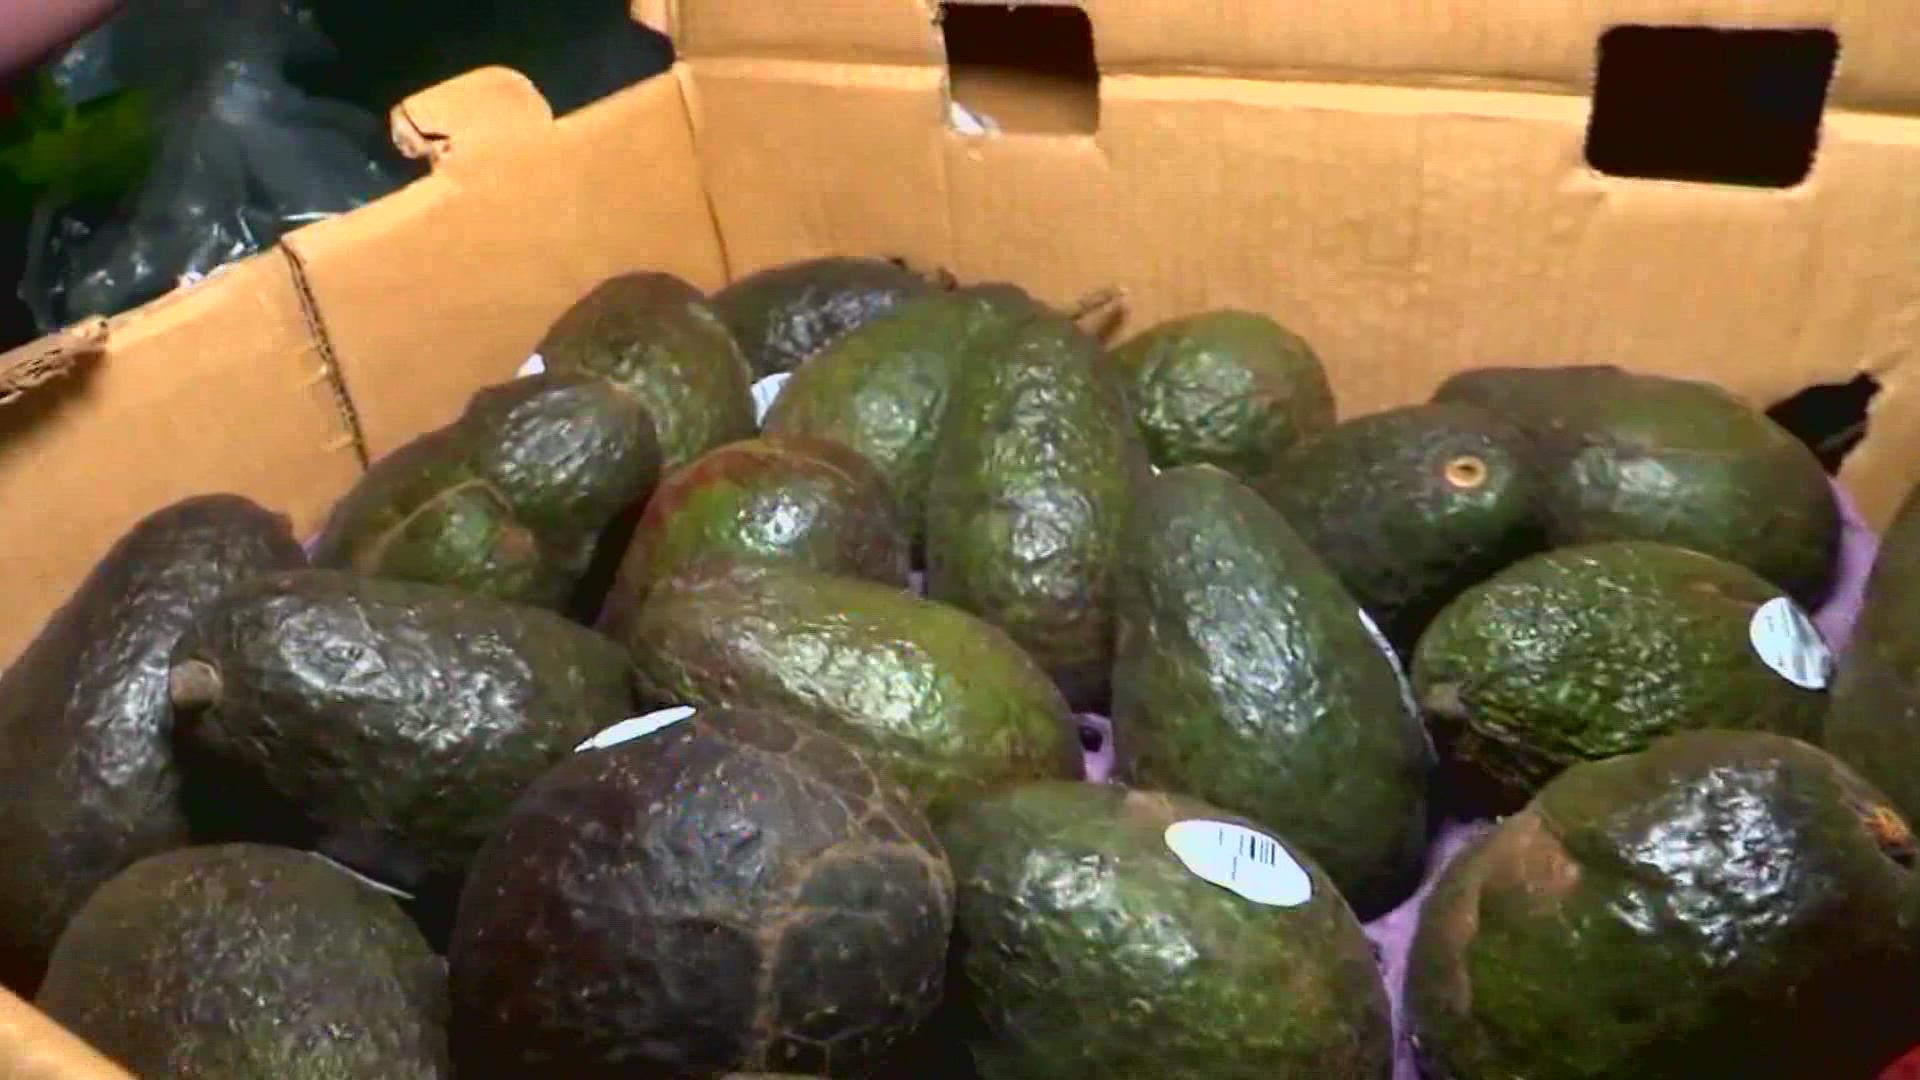 A TikTok user said keeping avocados in water would keep them fresh, but the FDA says it could do more harm than good.